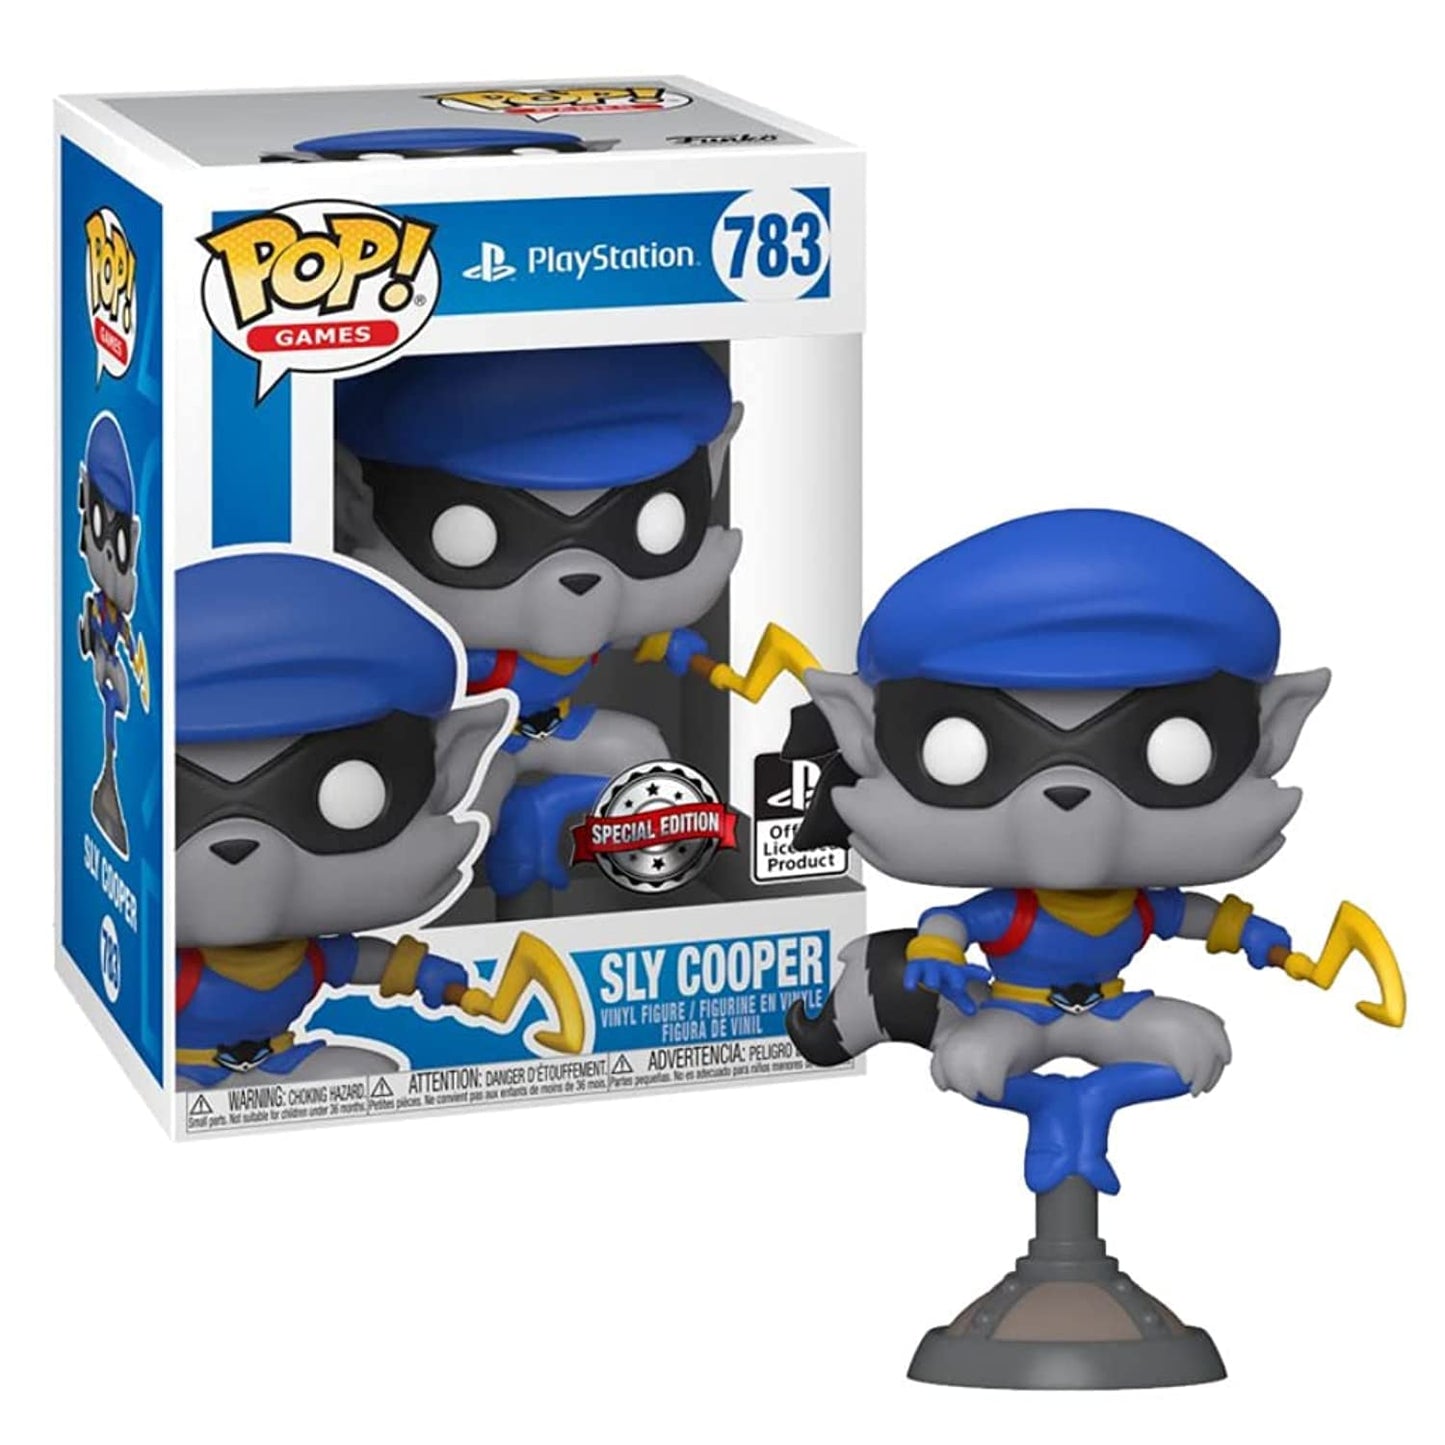 Funko POP! Games Playstation Sly Cooper #783 Exclusive